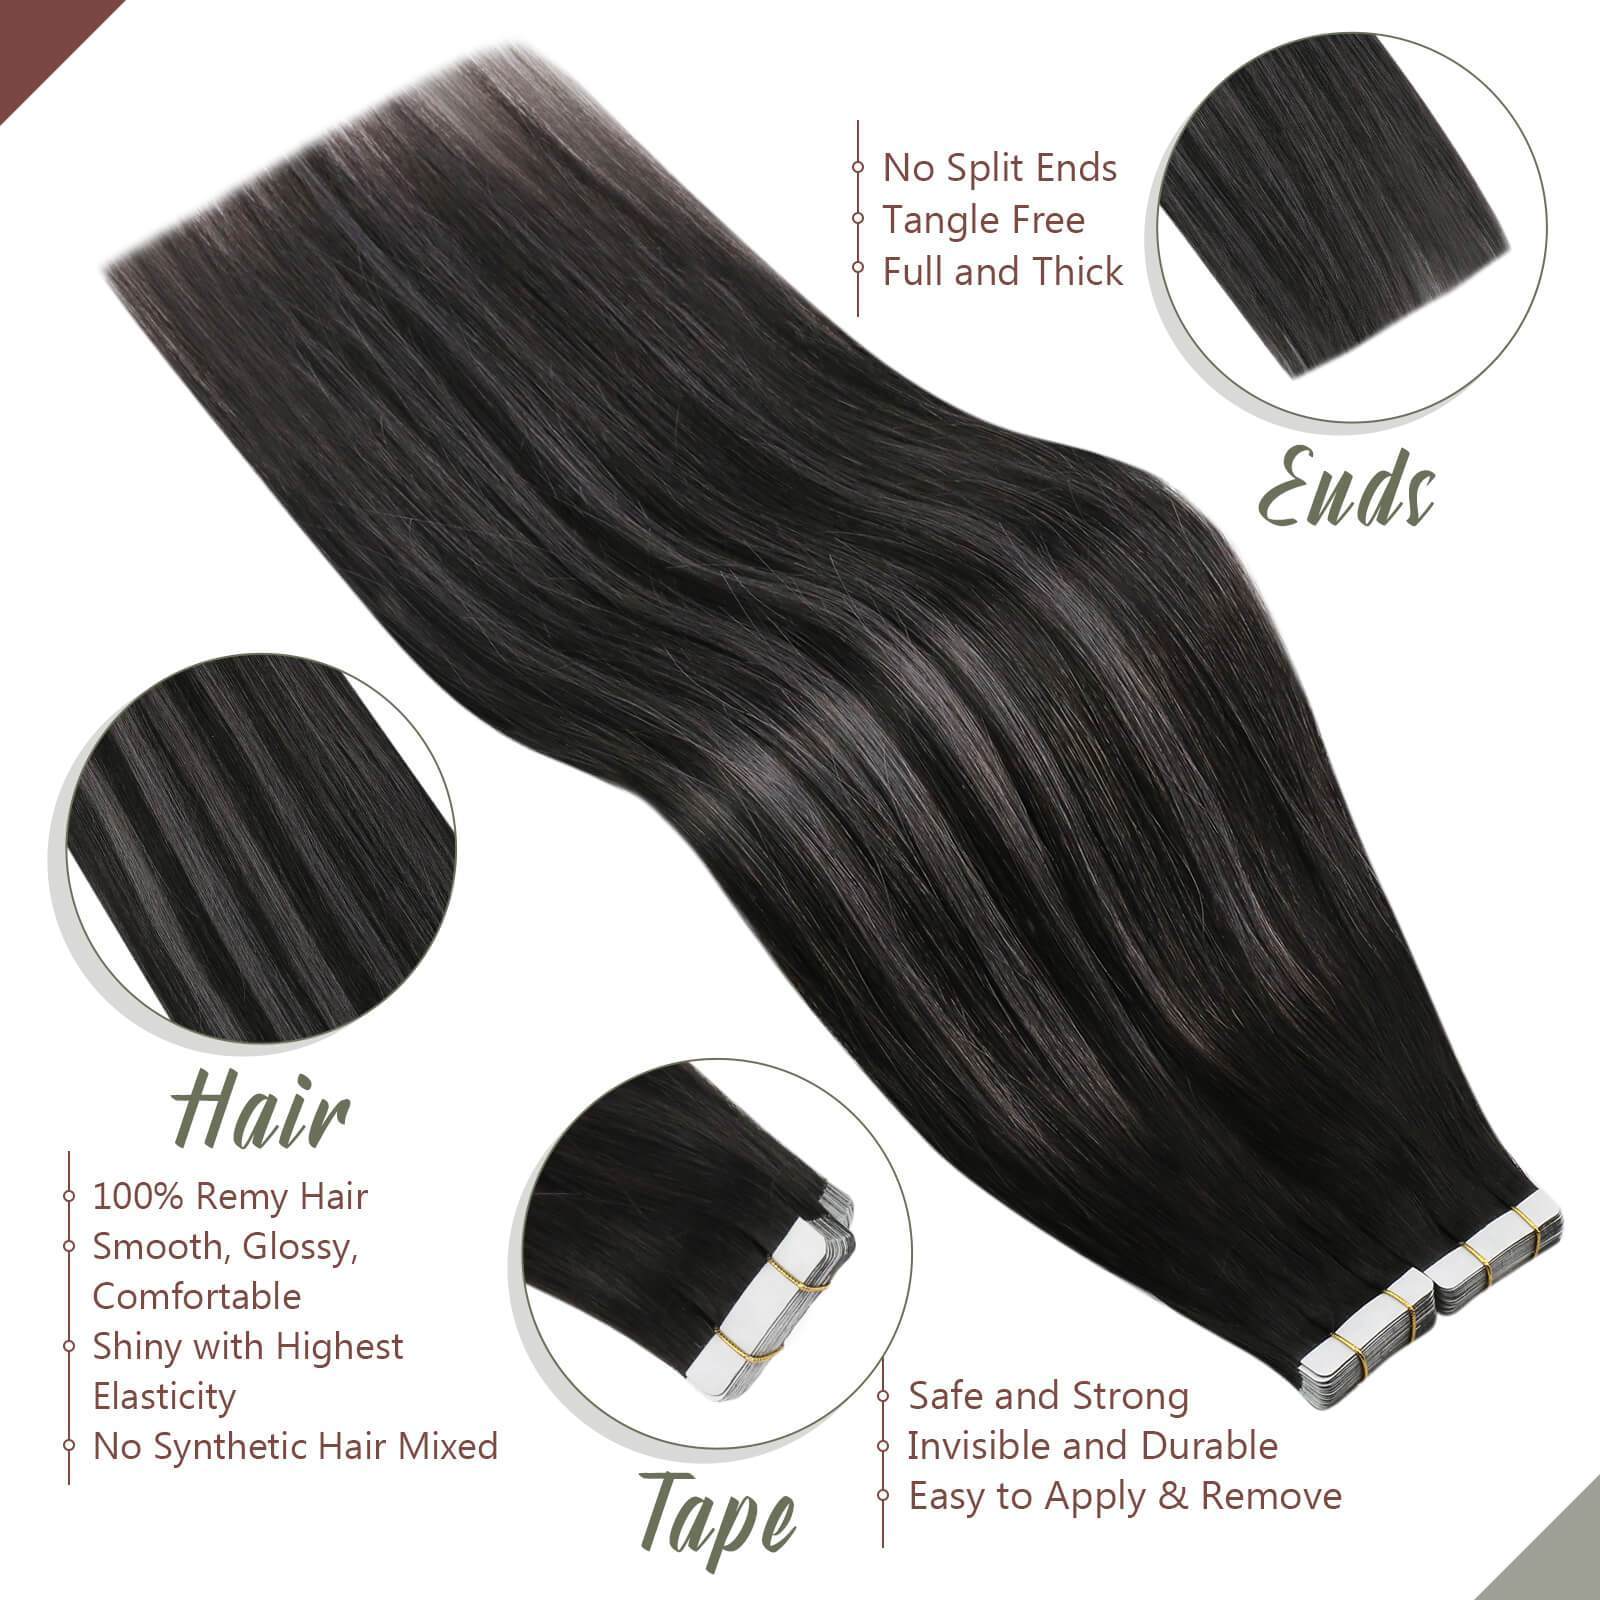 Balayage Tape Hair Extensions Black with Brown and Silver 1b/4/silver-UgeatHair